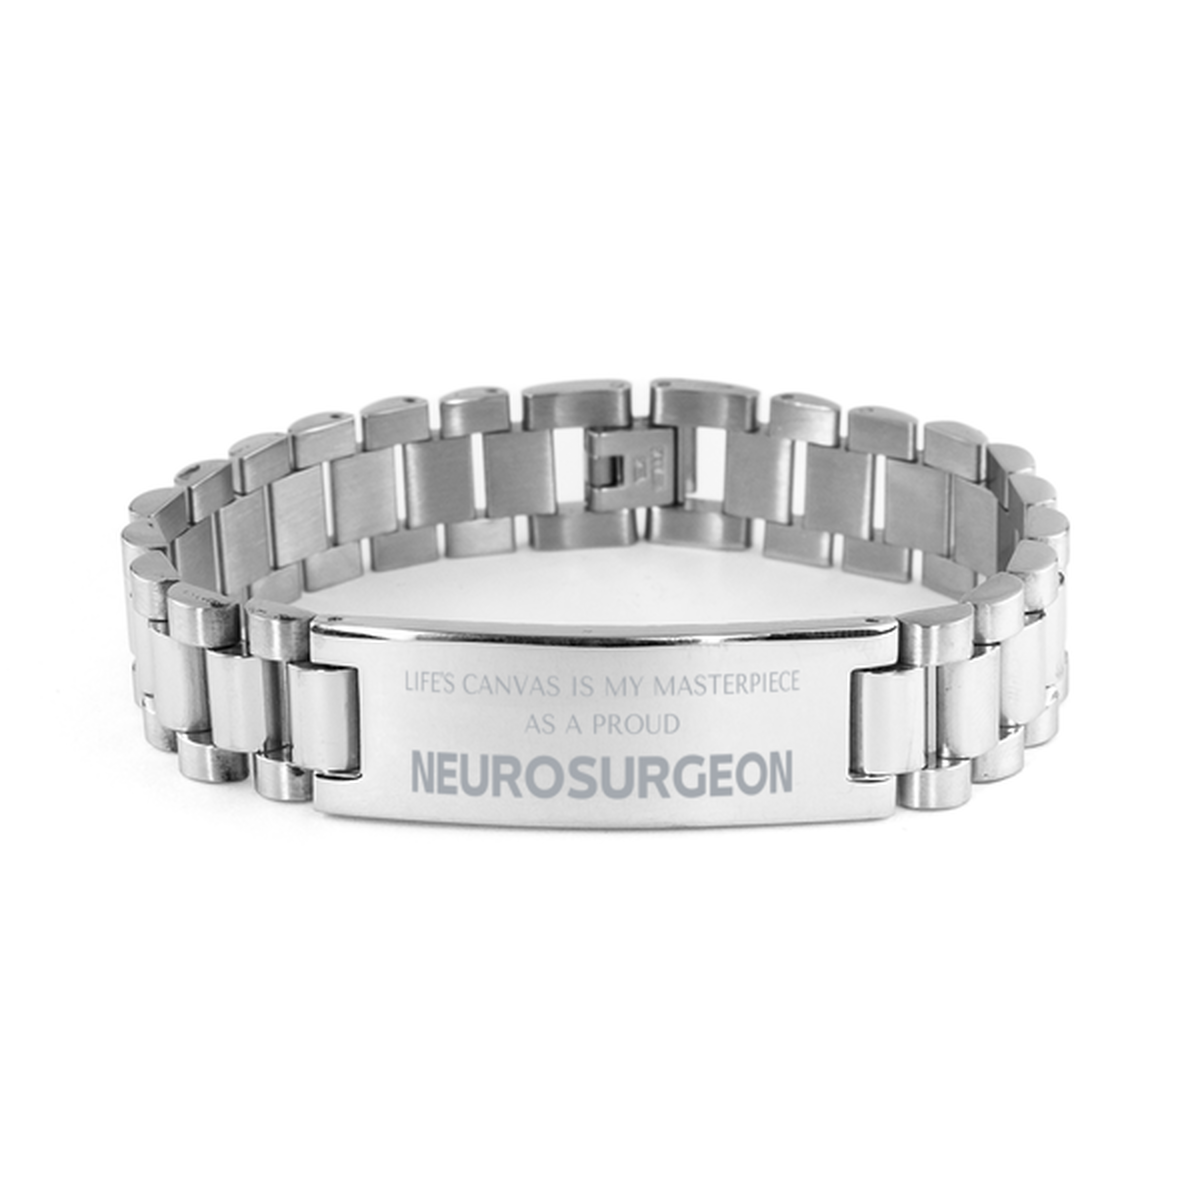 Proud Neurosurgeon Gifts, Life's canvas is my masterpiece, Epic Birthday Christmas Unique Ladder Stainless Steel Bracelet For Neurosurgeon, Coworkers, Men, Women, Friends